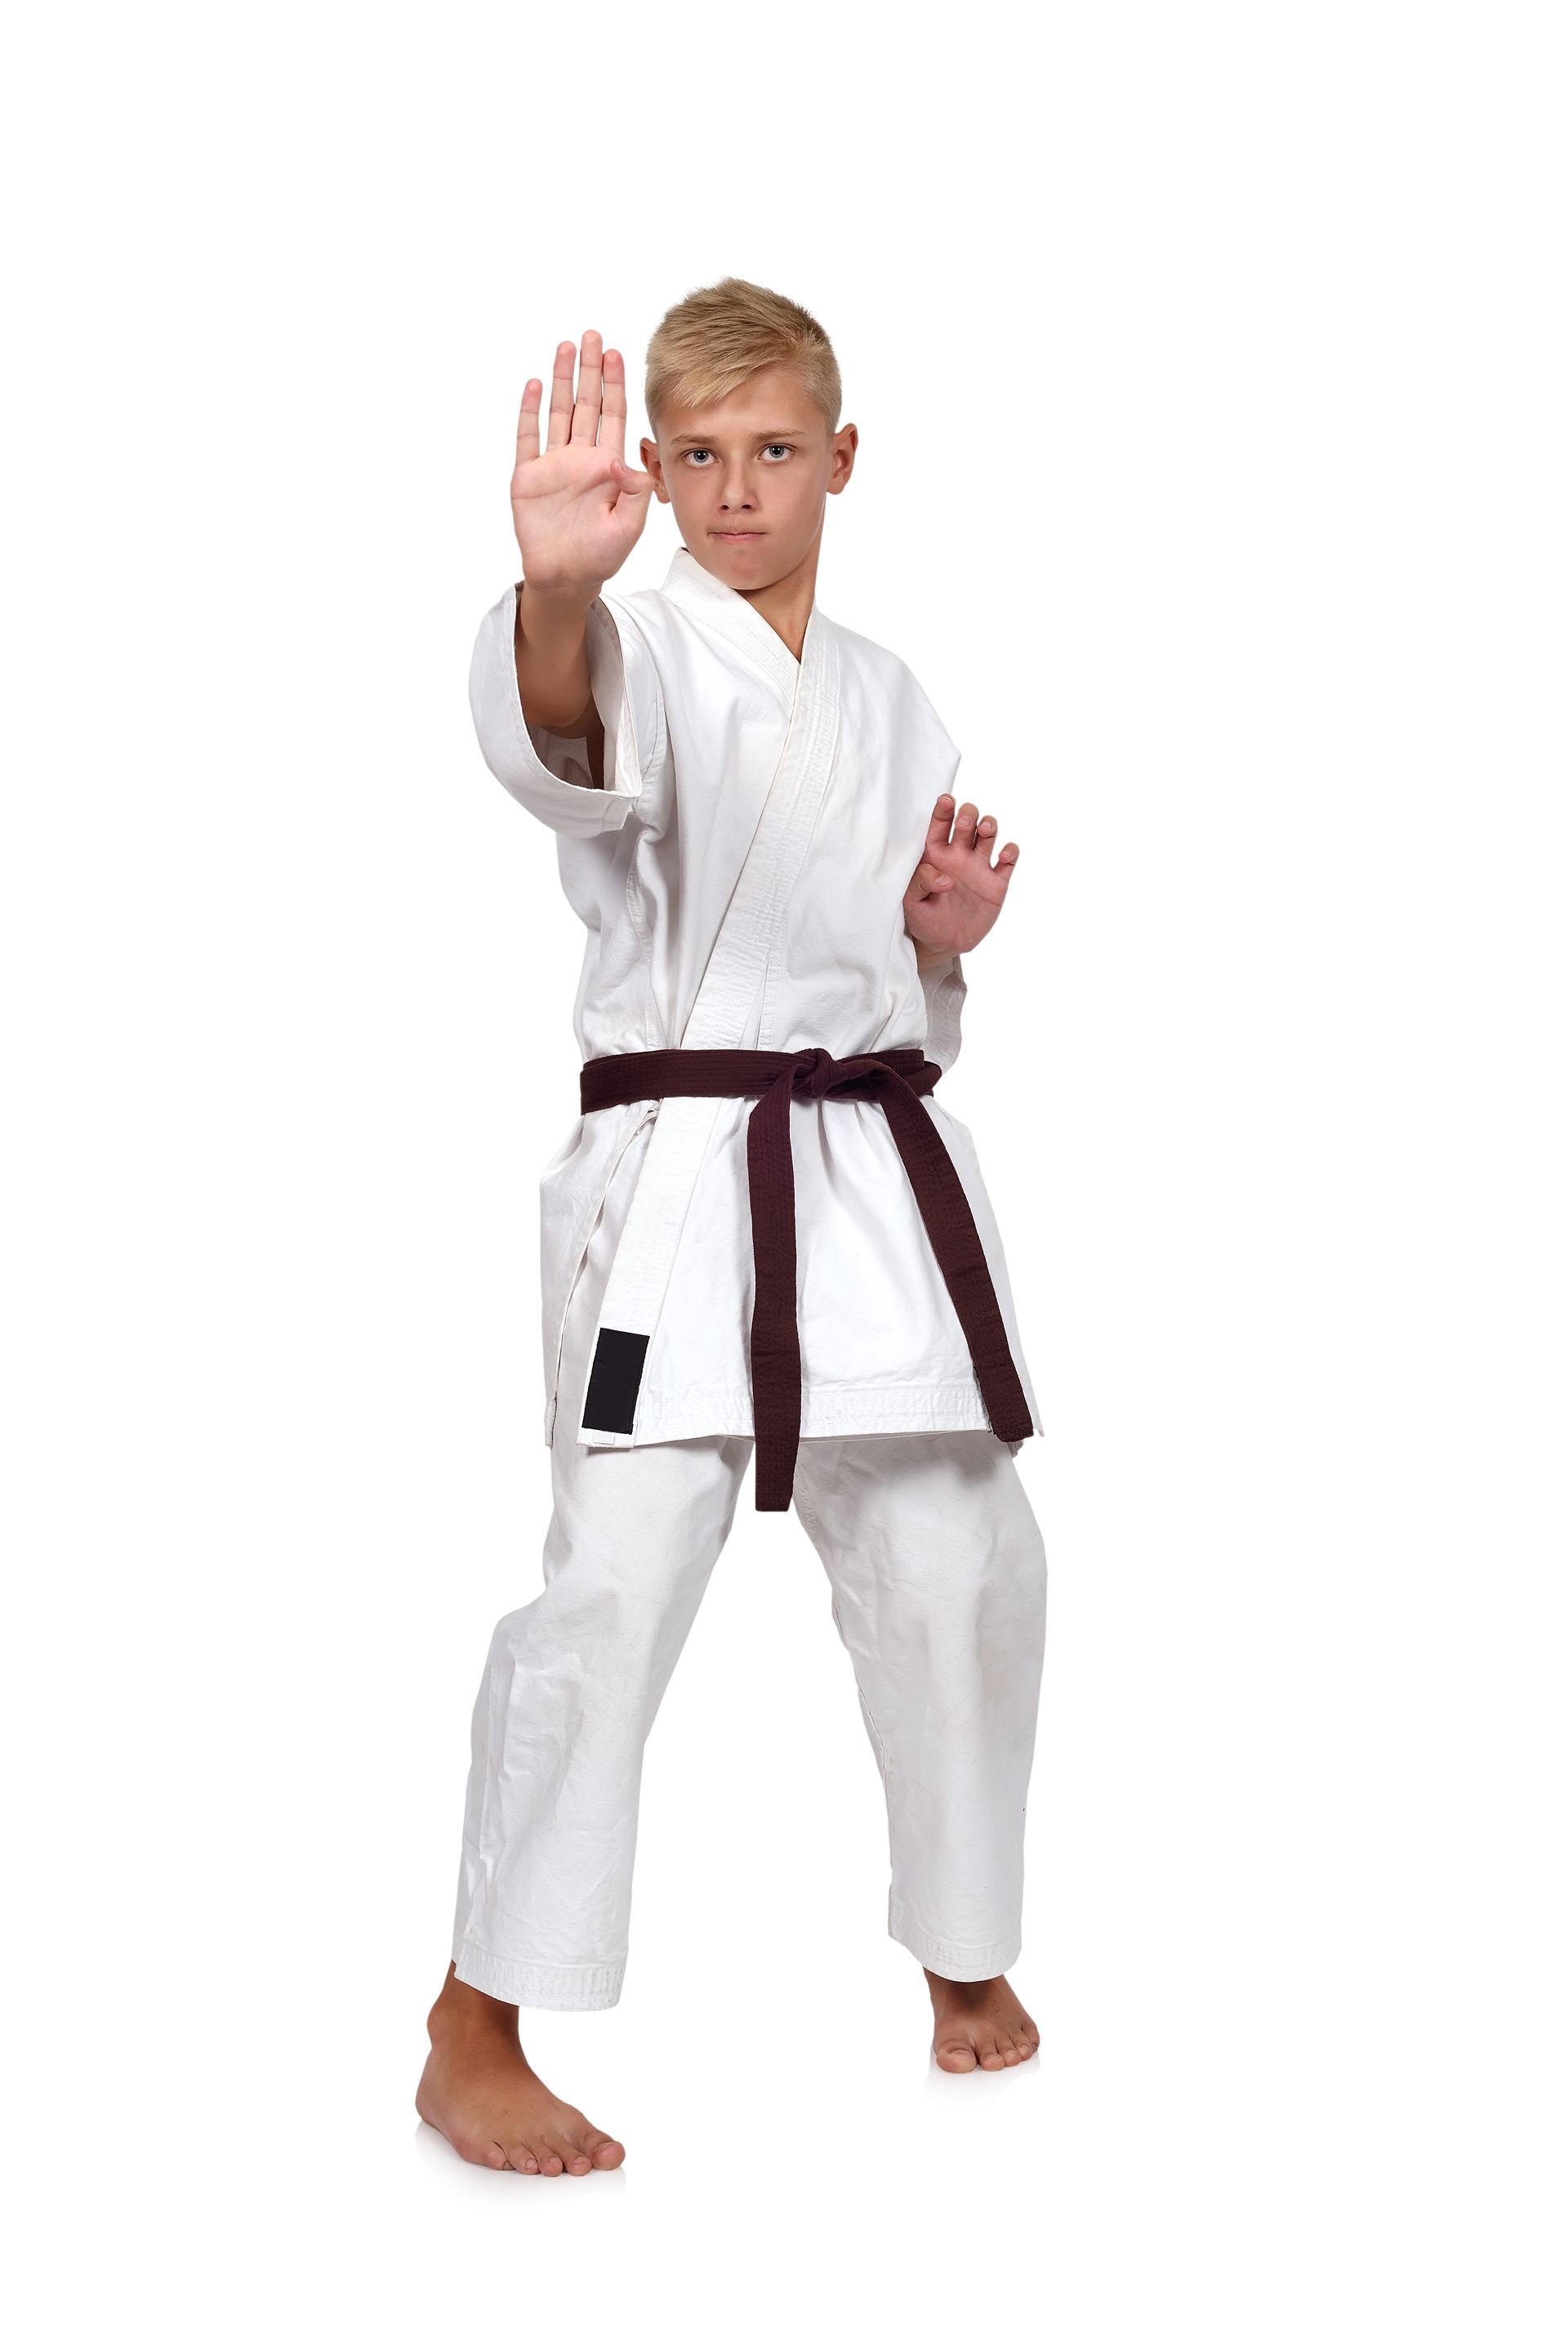 boy in karate suit training on white background